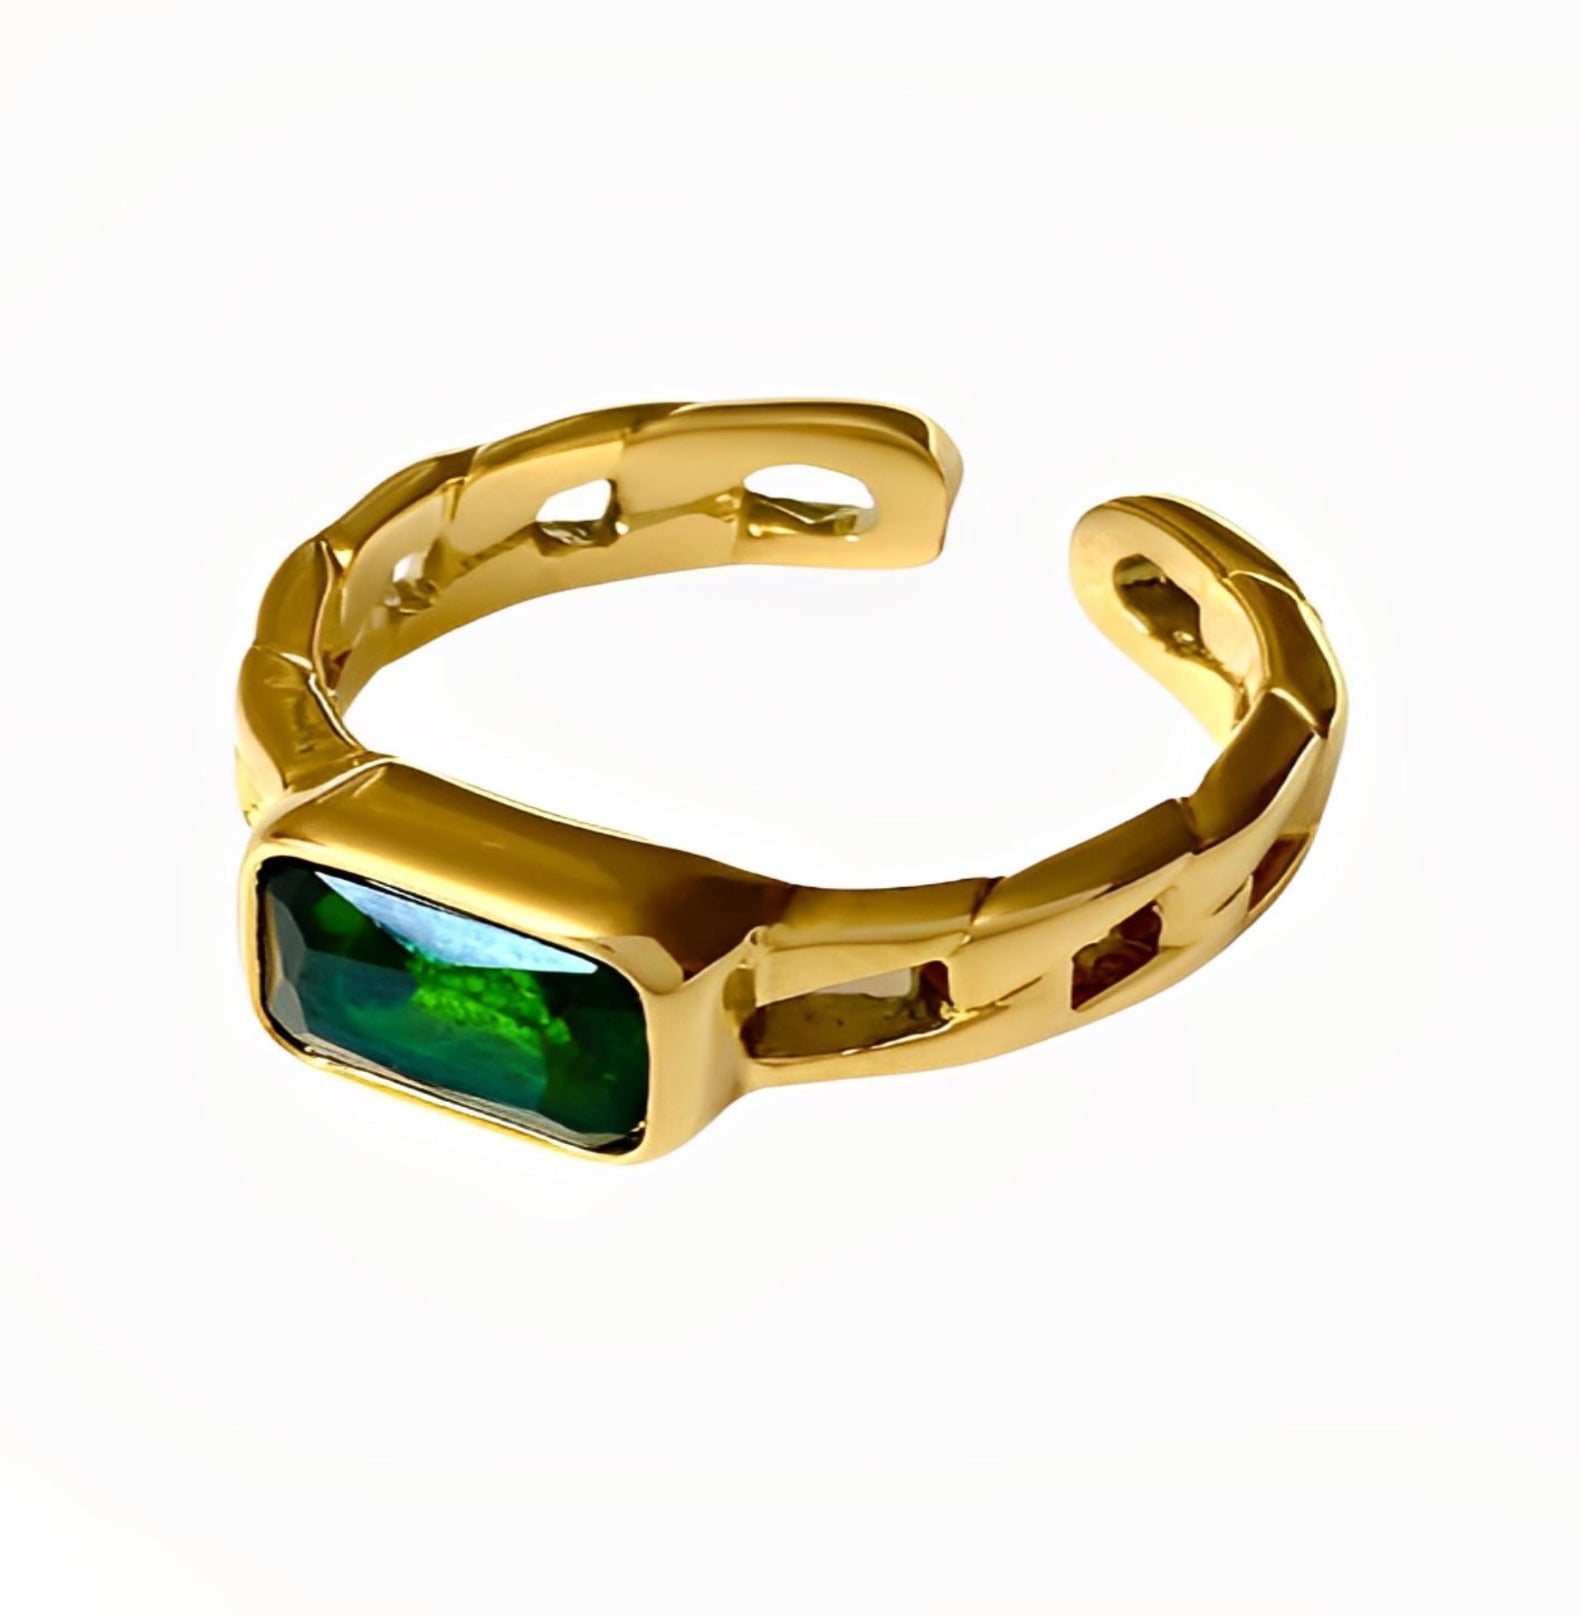 GREEN SQUARE RING ring Yubama Jewelry Online Store - The Elegant Designs of Gold and Silver ! Size10 